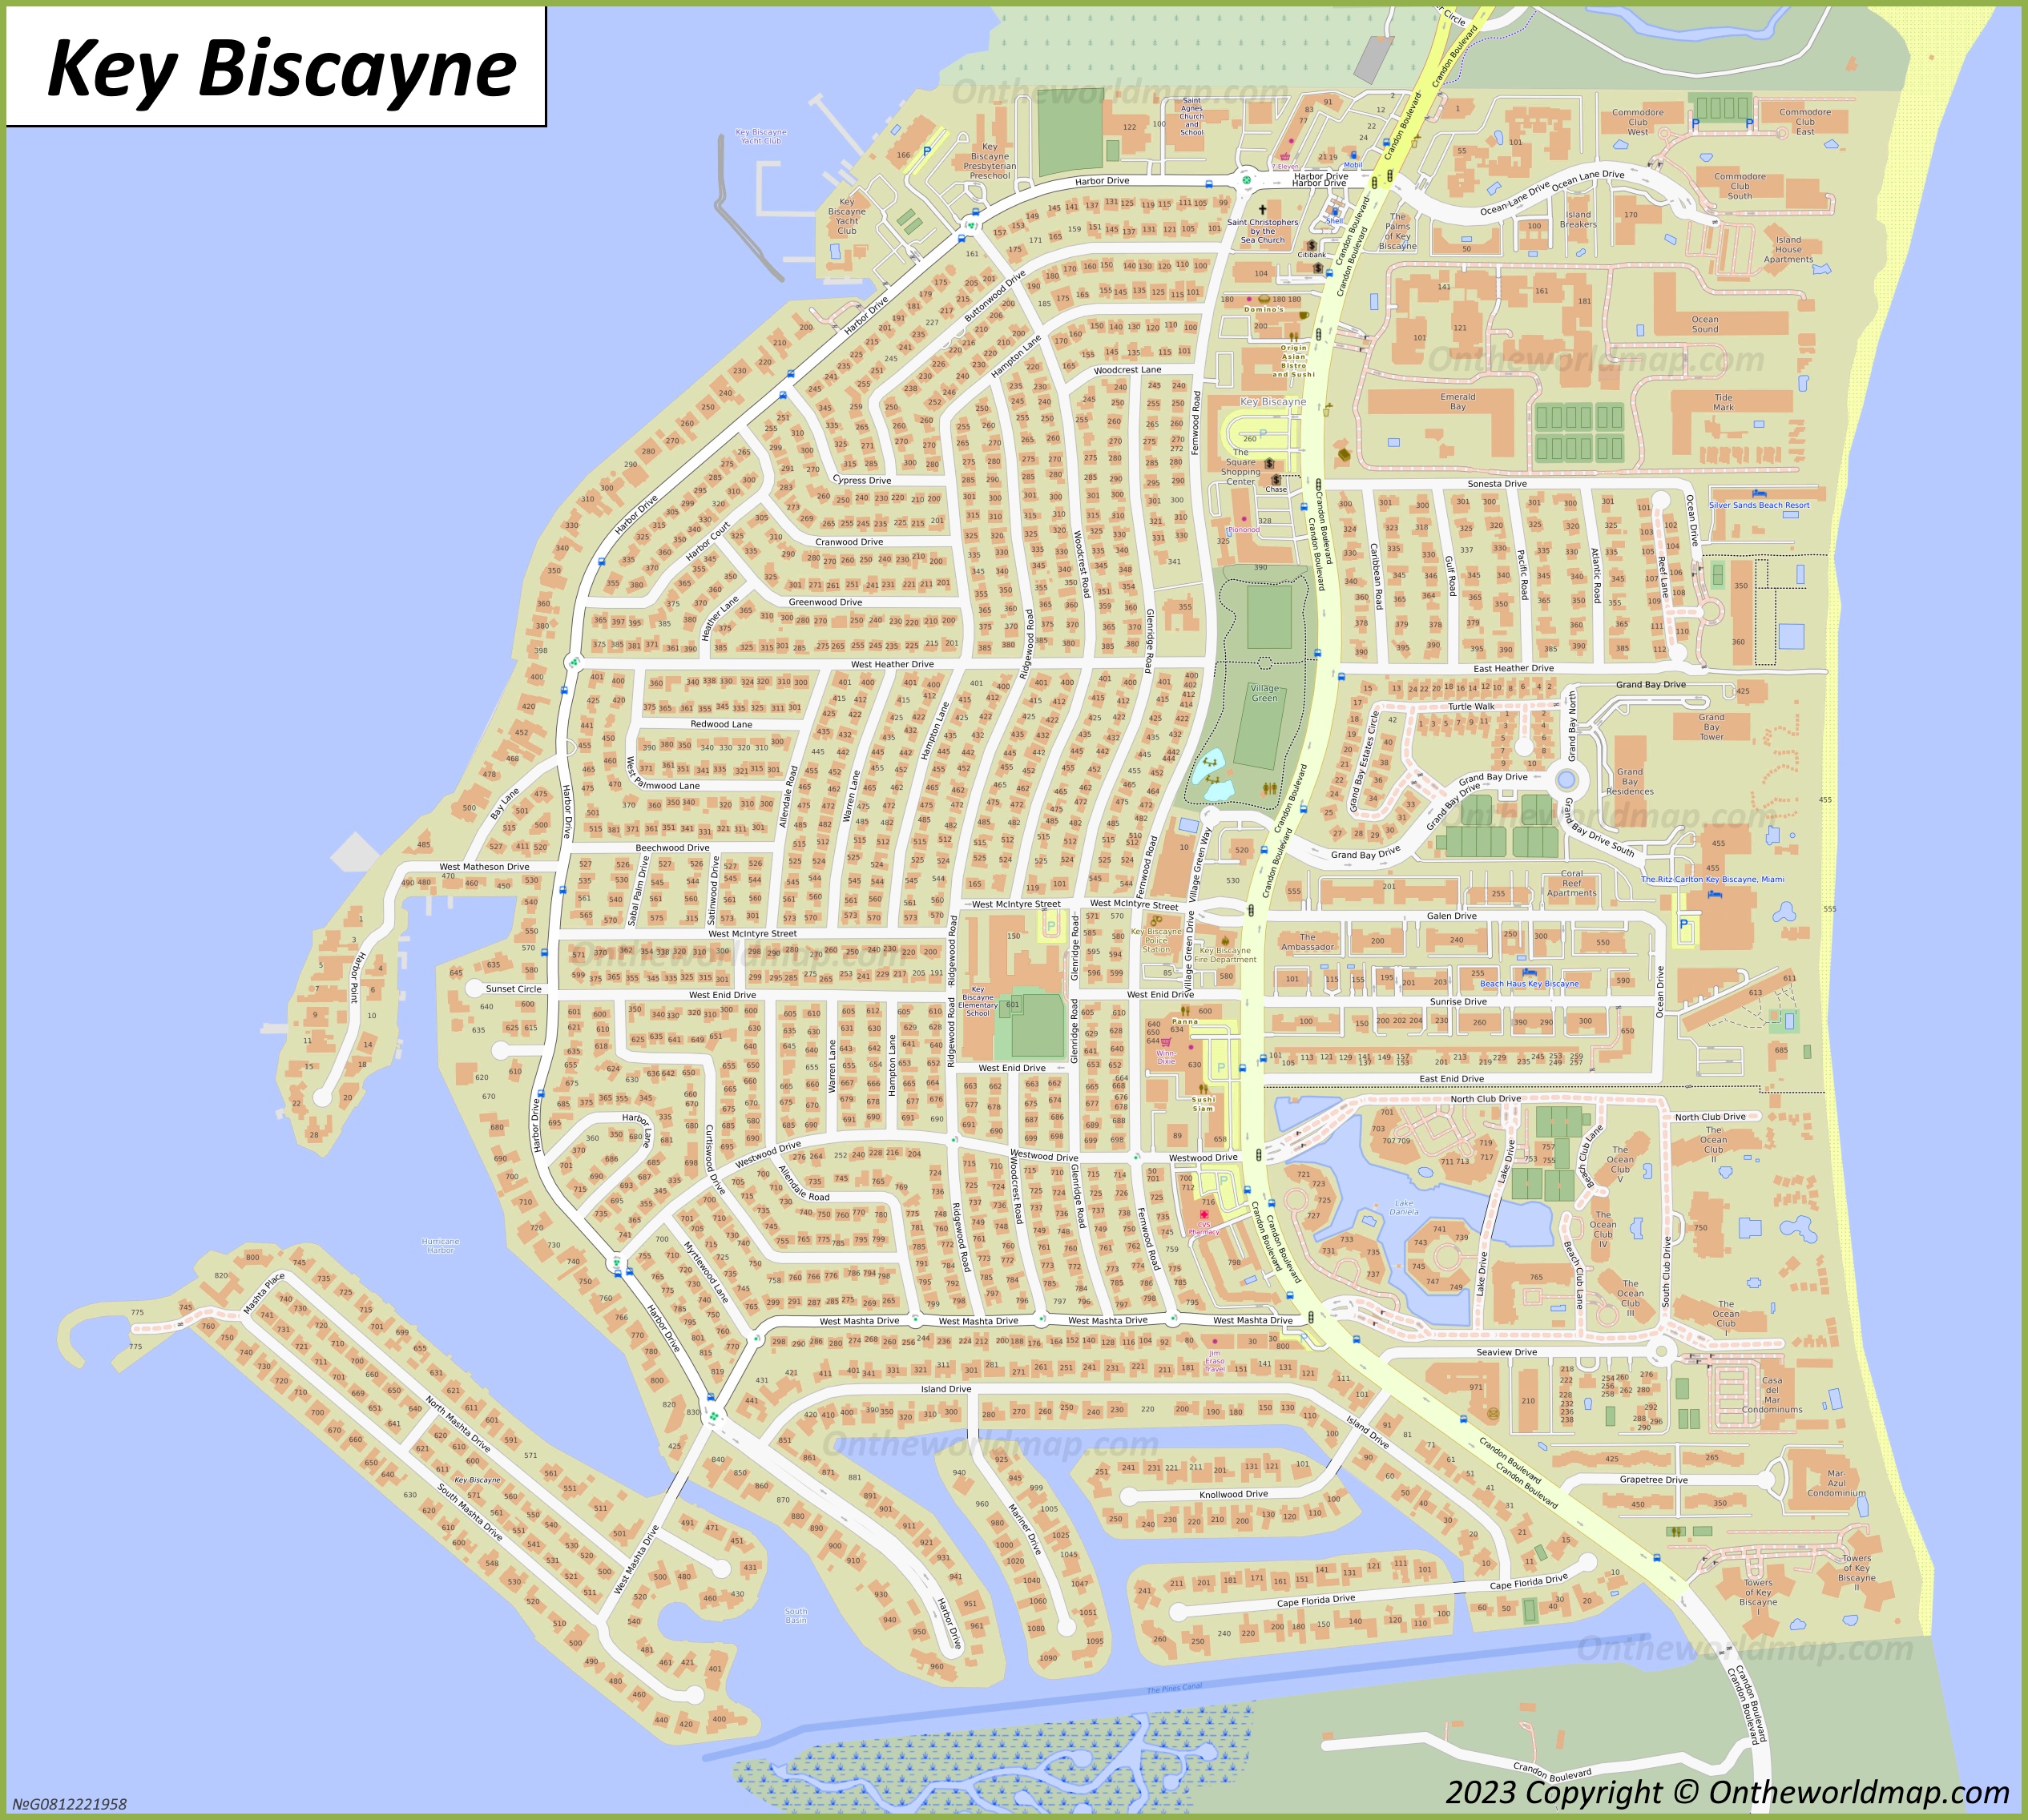 Key Biscayne Town Map